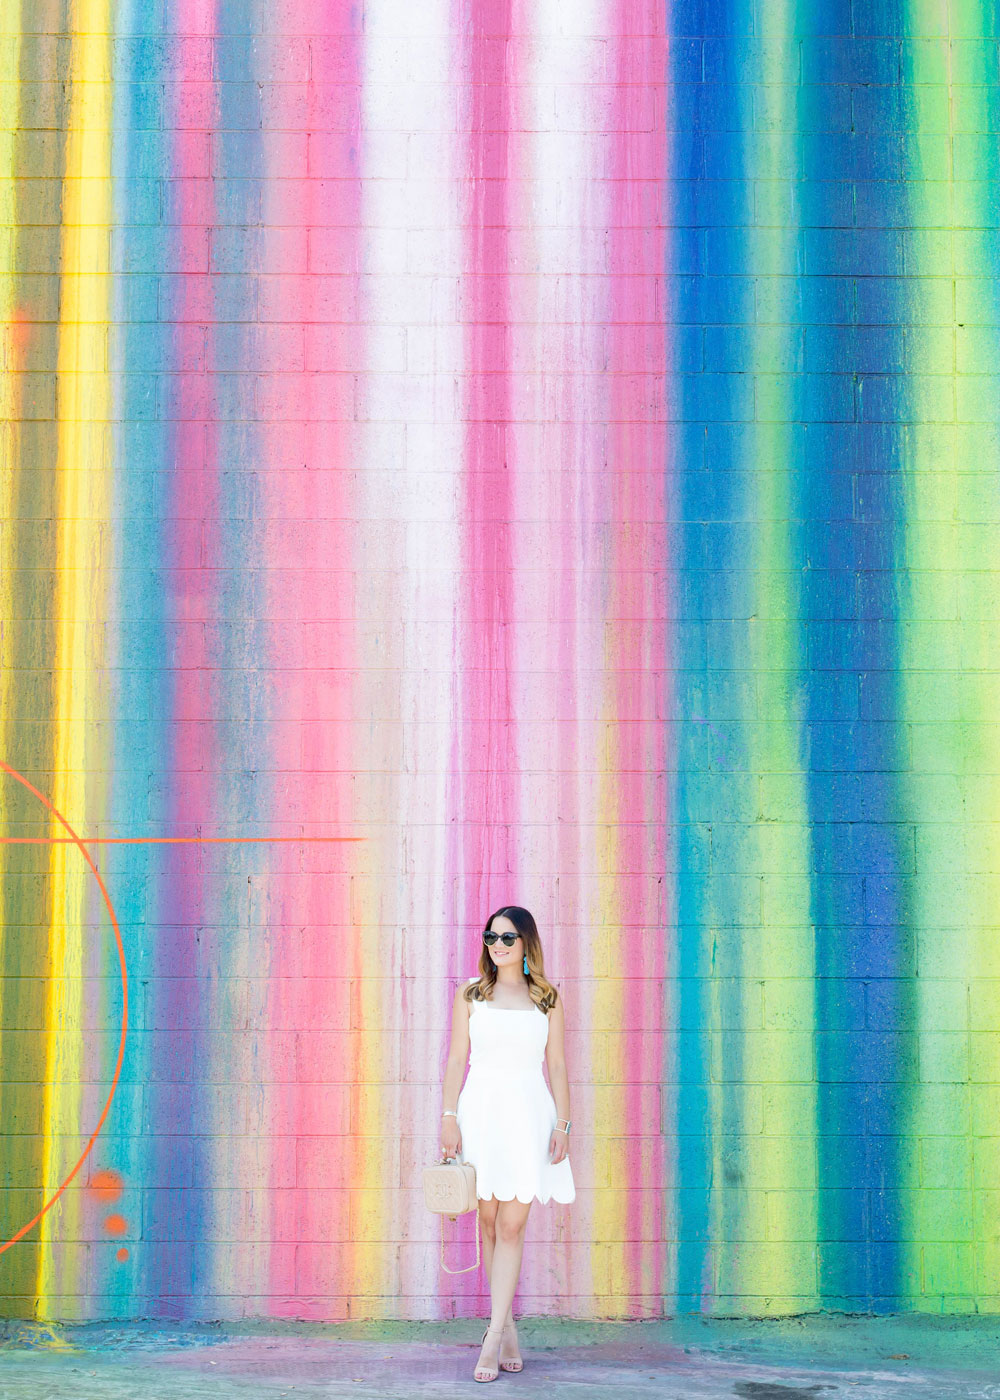 Los Angeles Dripping Paint Mural Wall